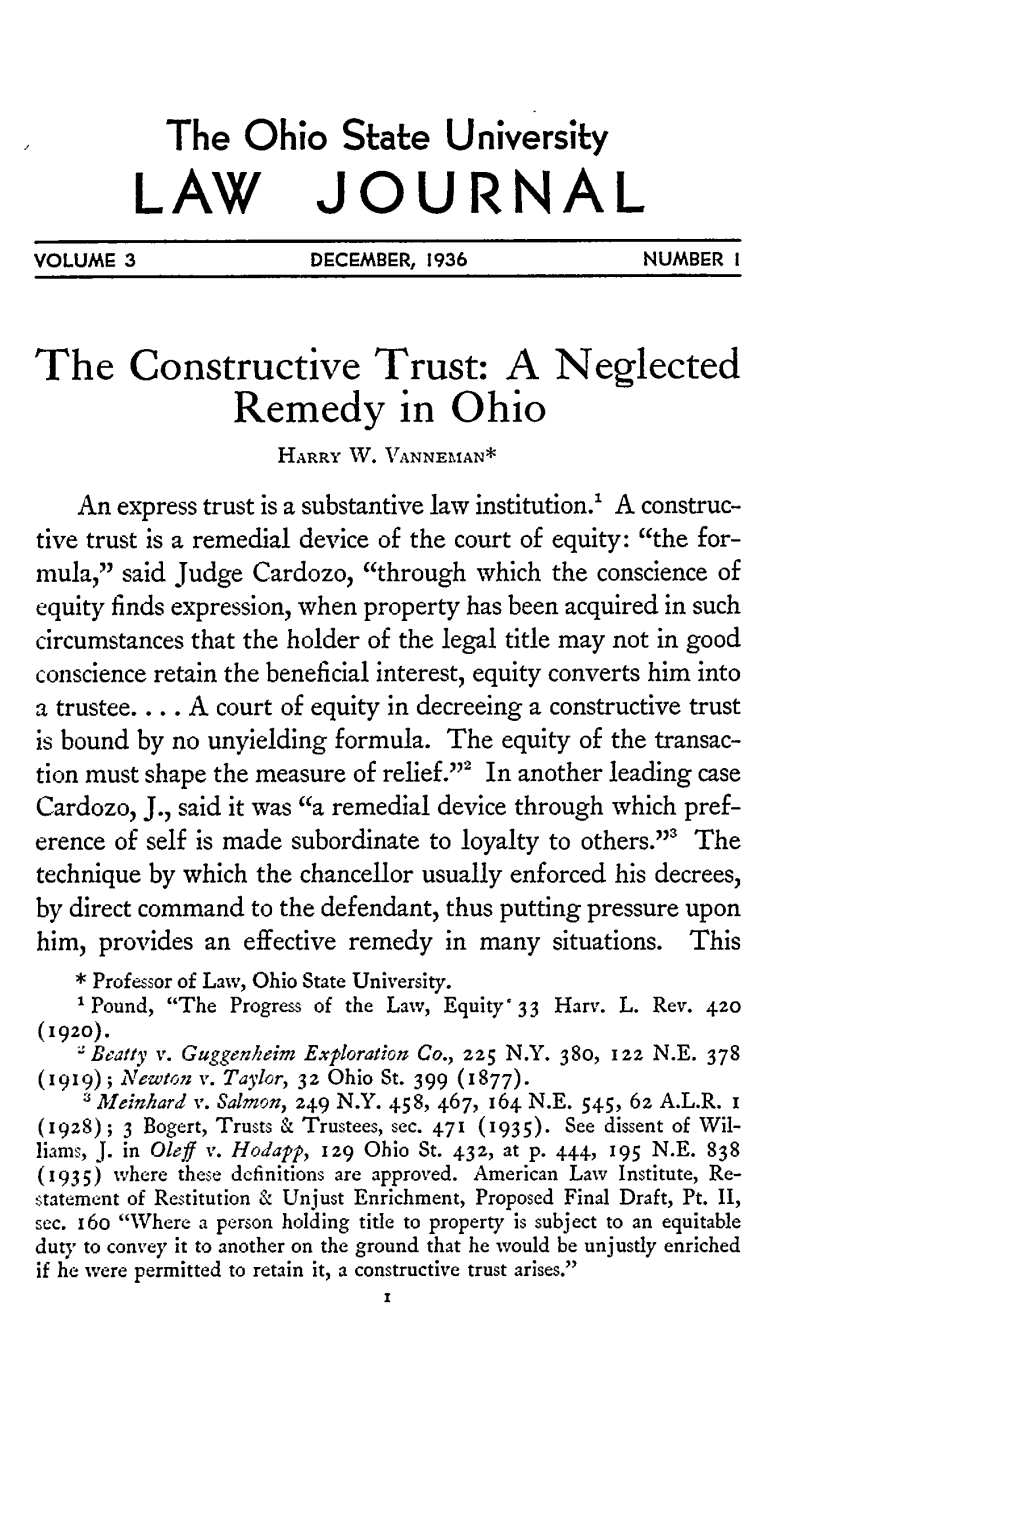 Constructive Trust: a Neglected Remedy in Ohio